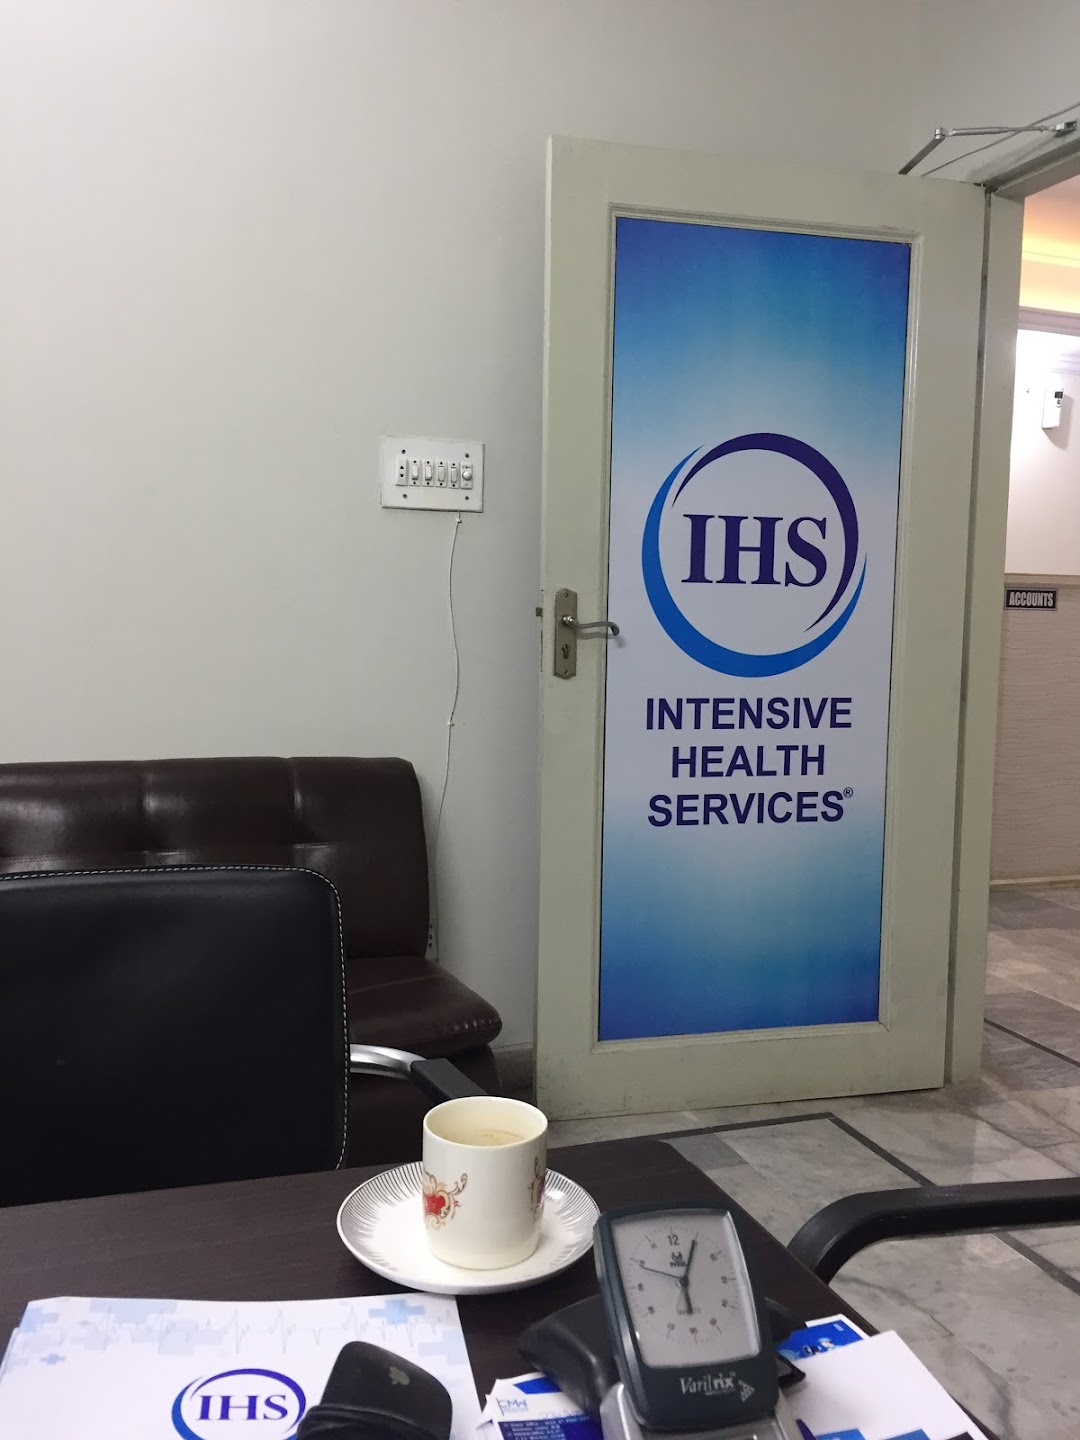 IHS Intensive Health Services